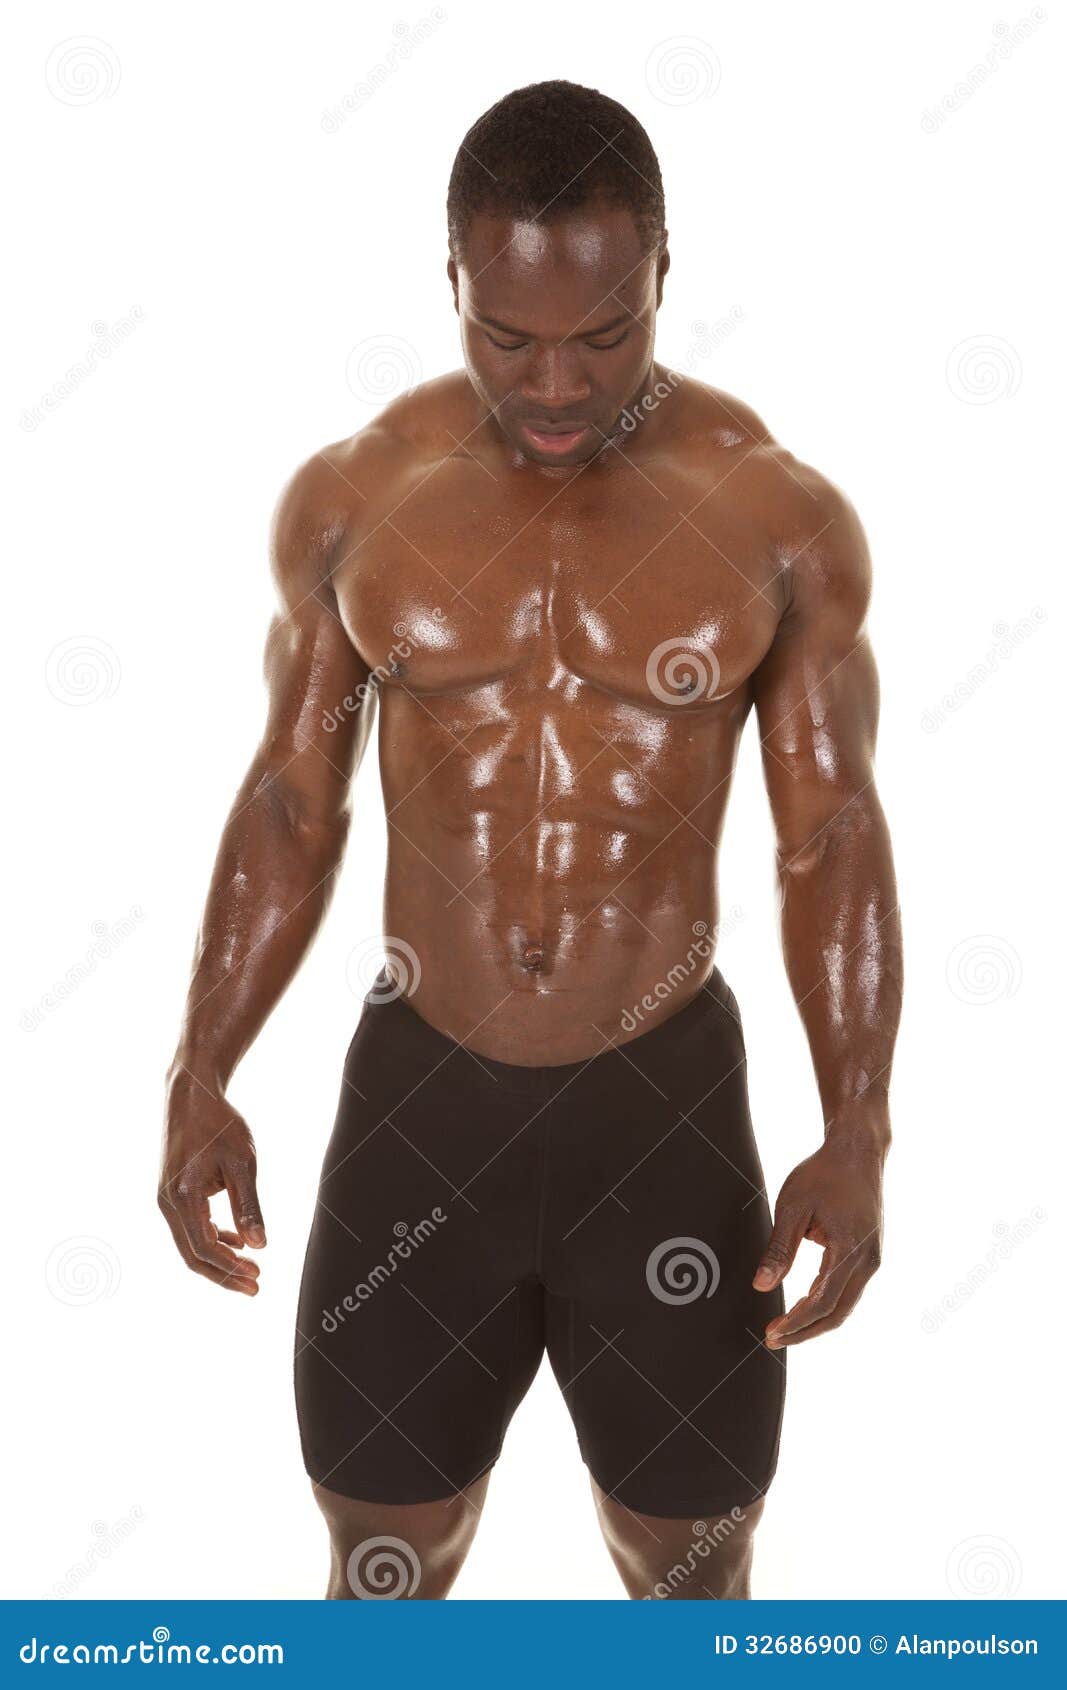 Strong man look down sweat stock photo. Image of fitness - 32686900